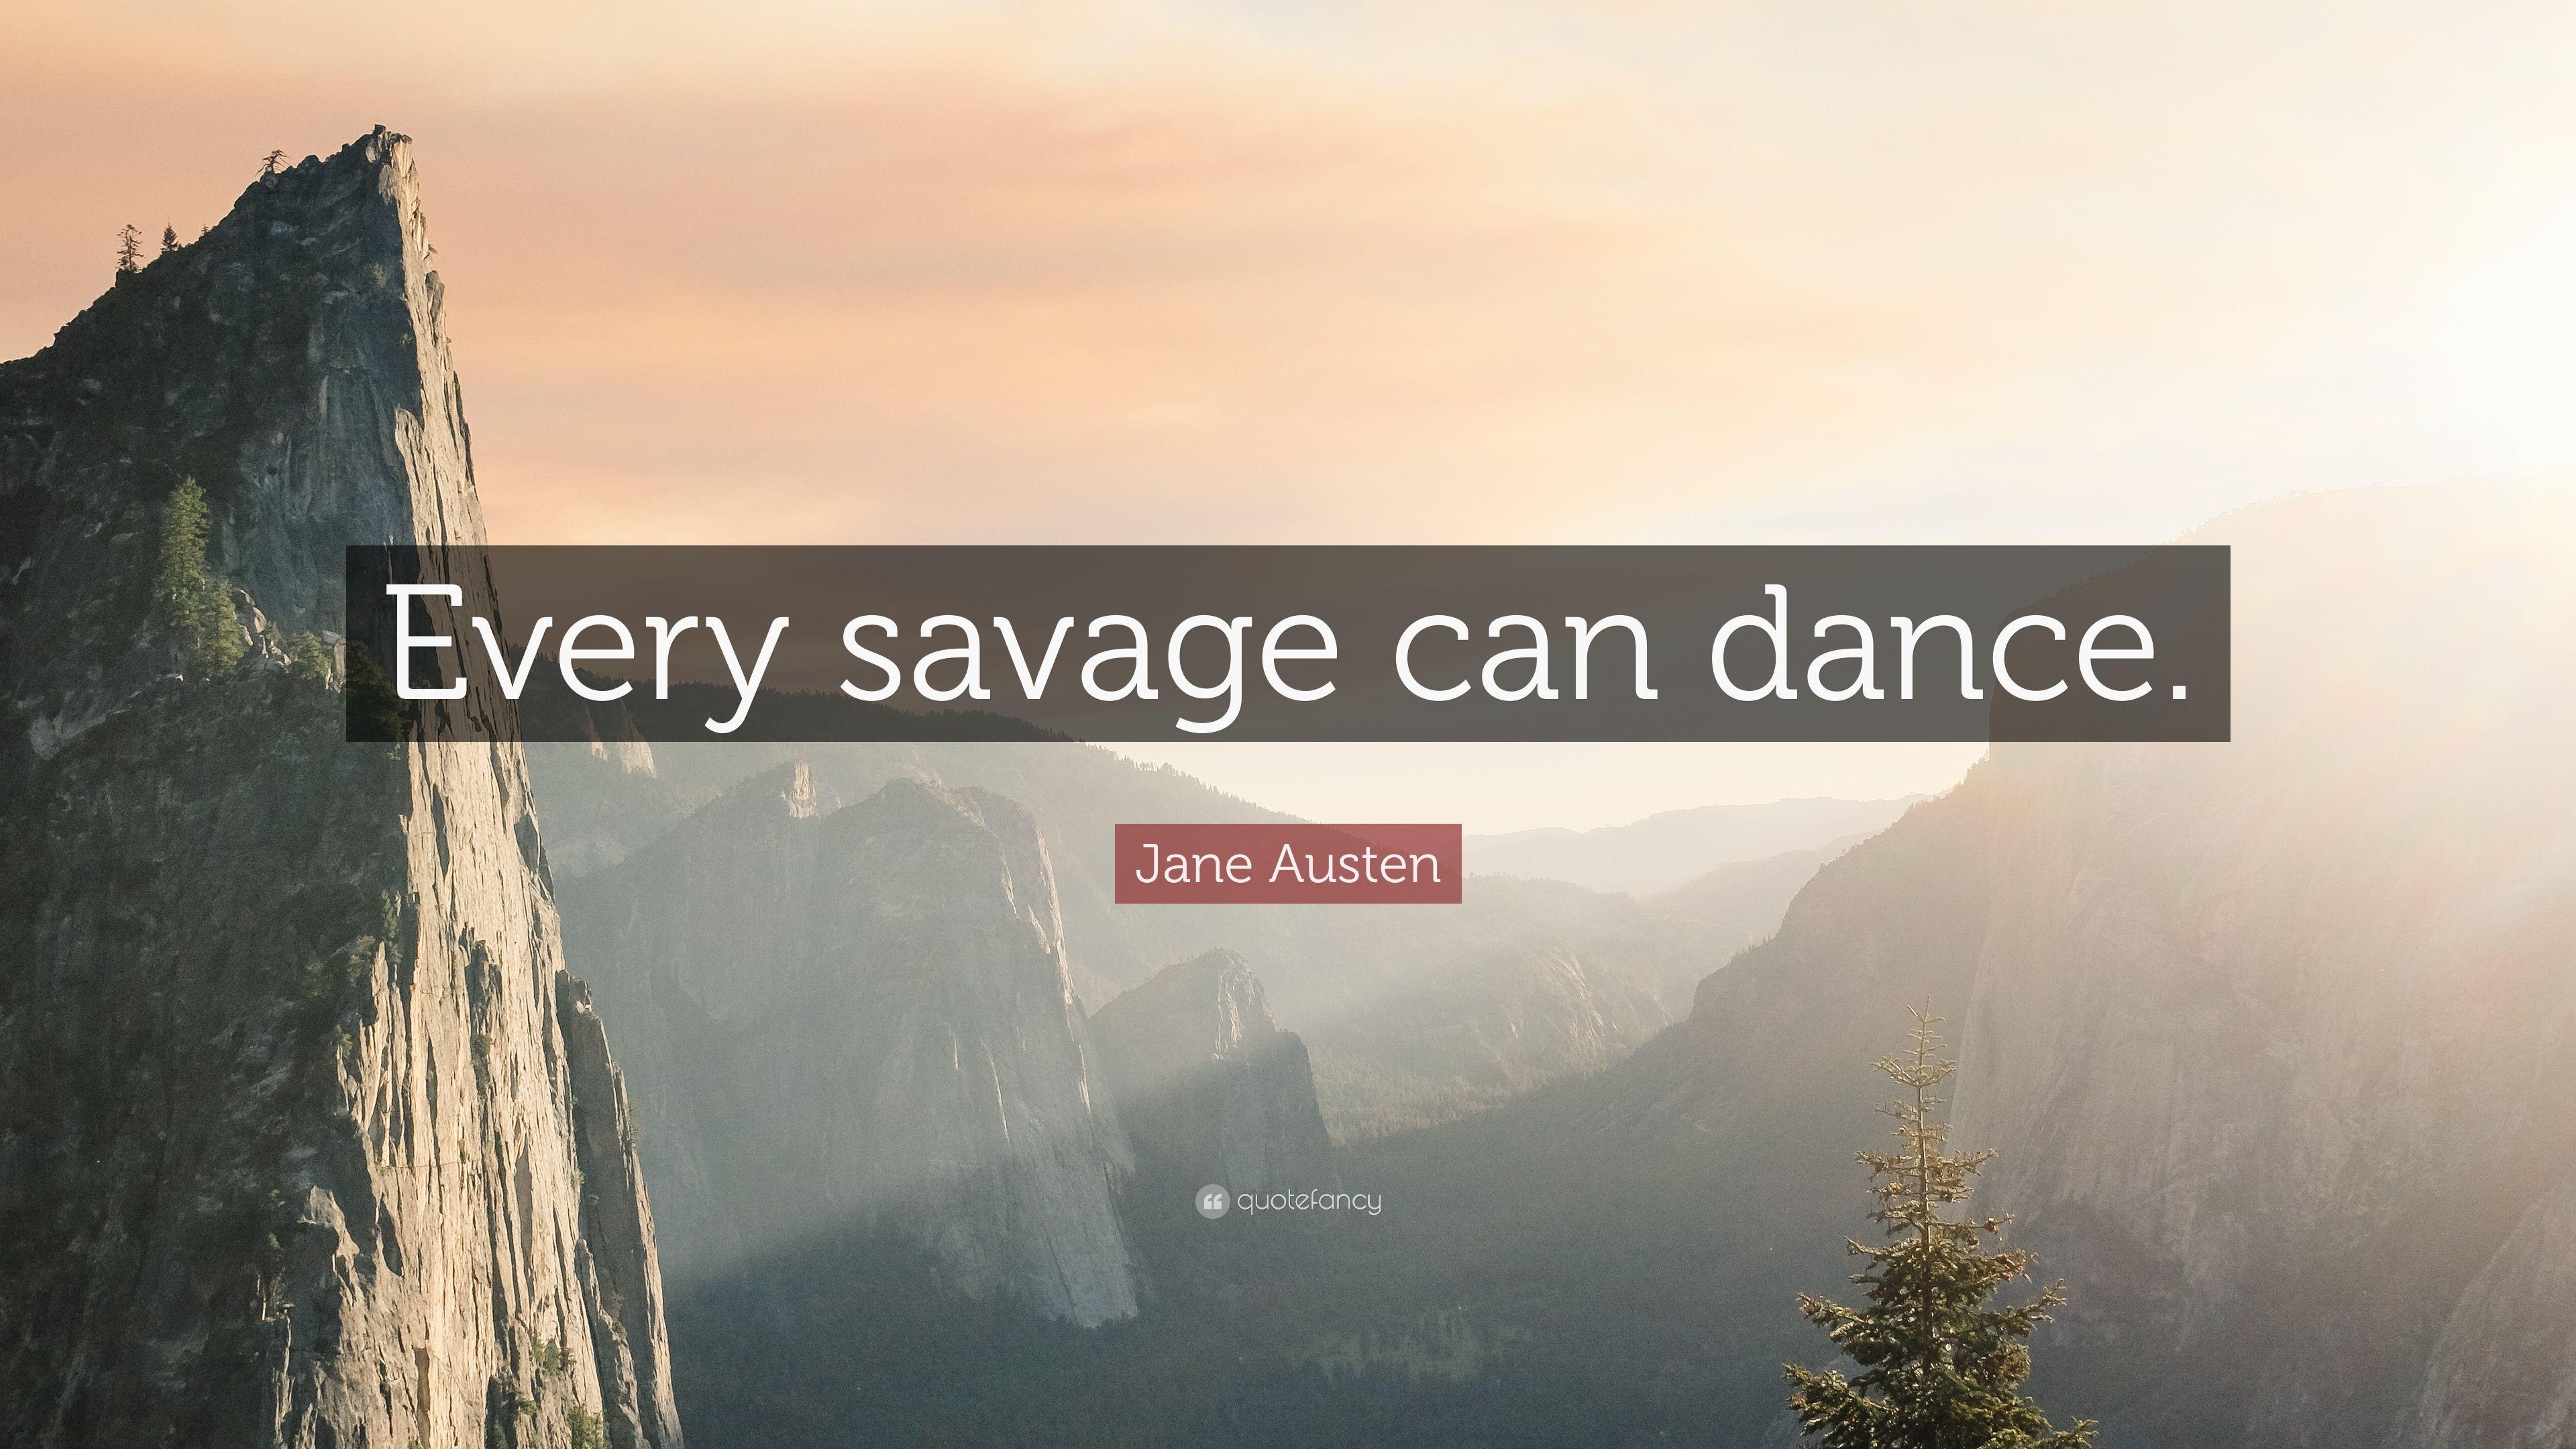 Jane Austen Quote: “Every savage can dance.” 10 wallpaper